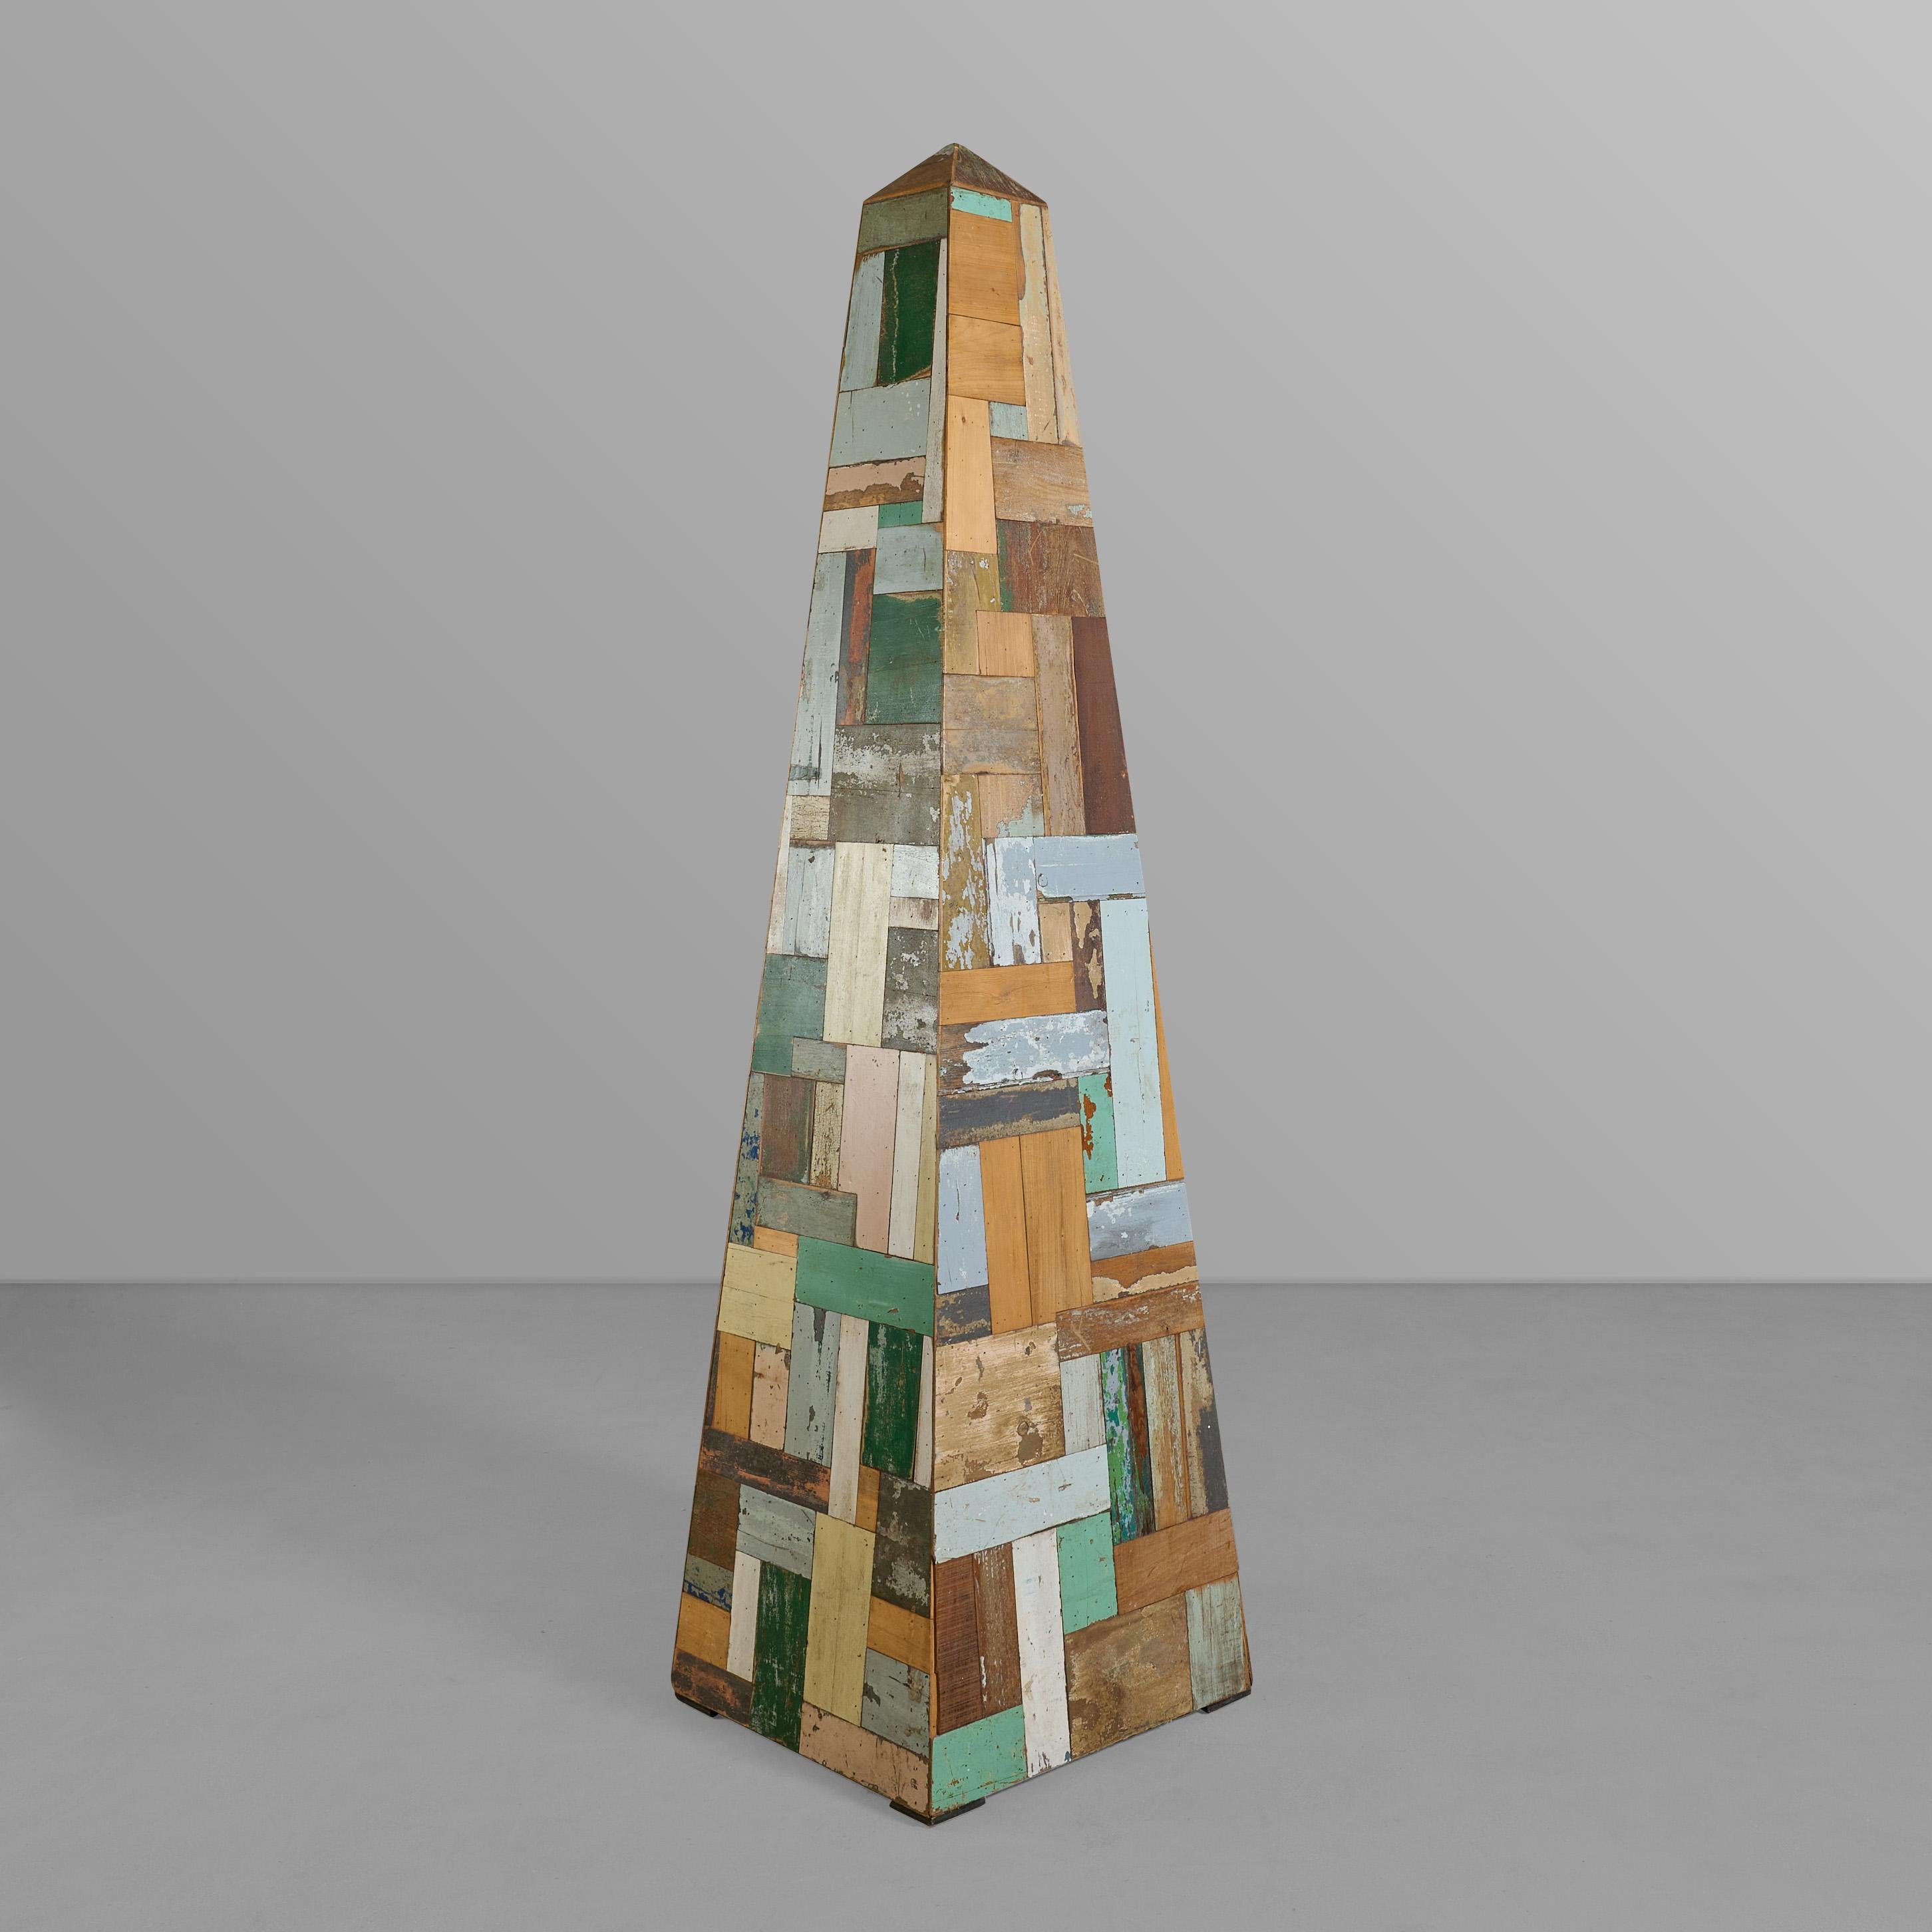 New construction patchwork wood obelisk from a maker in Argentina.

